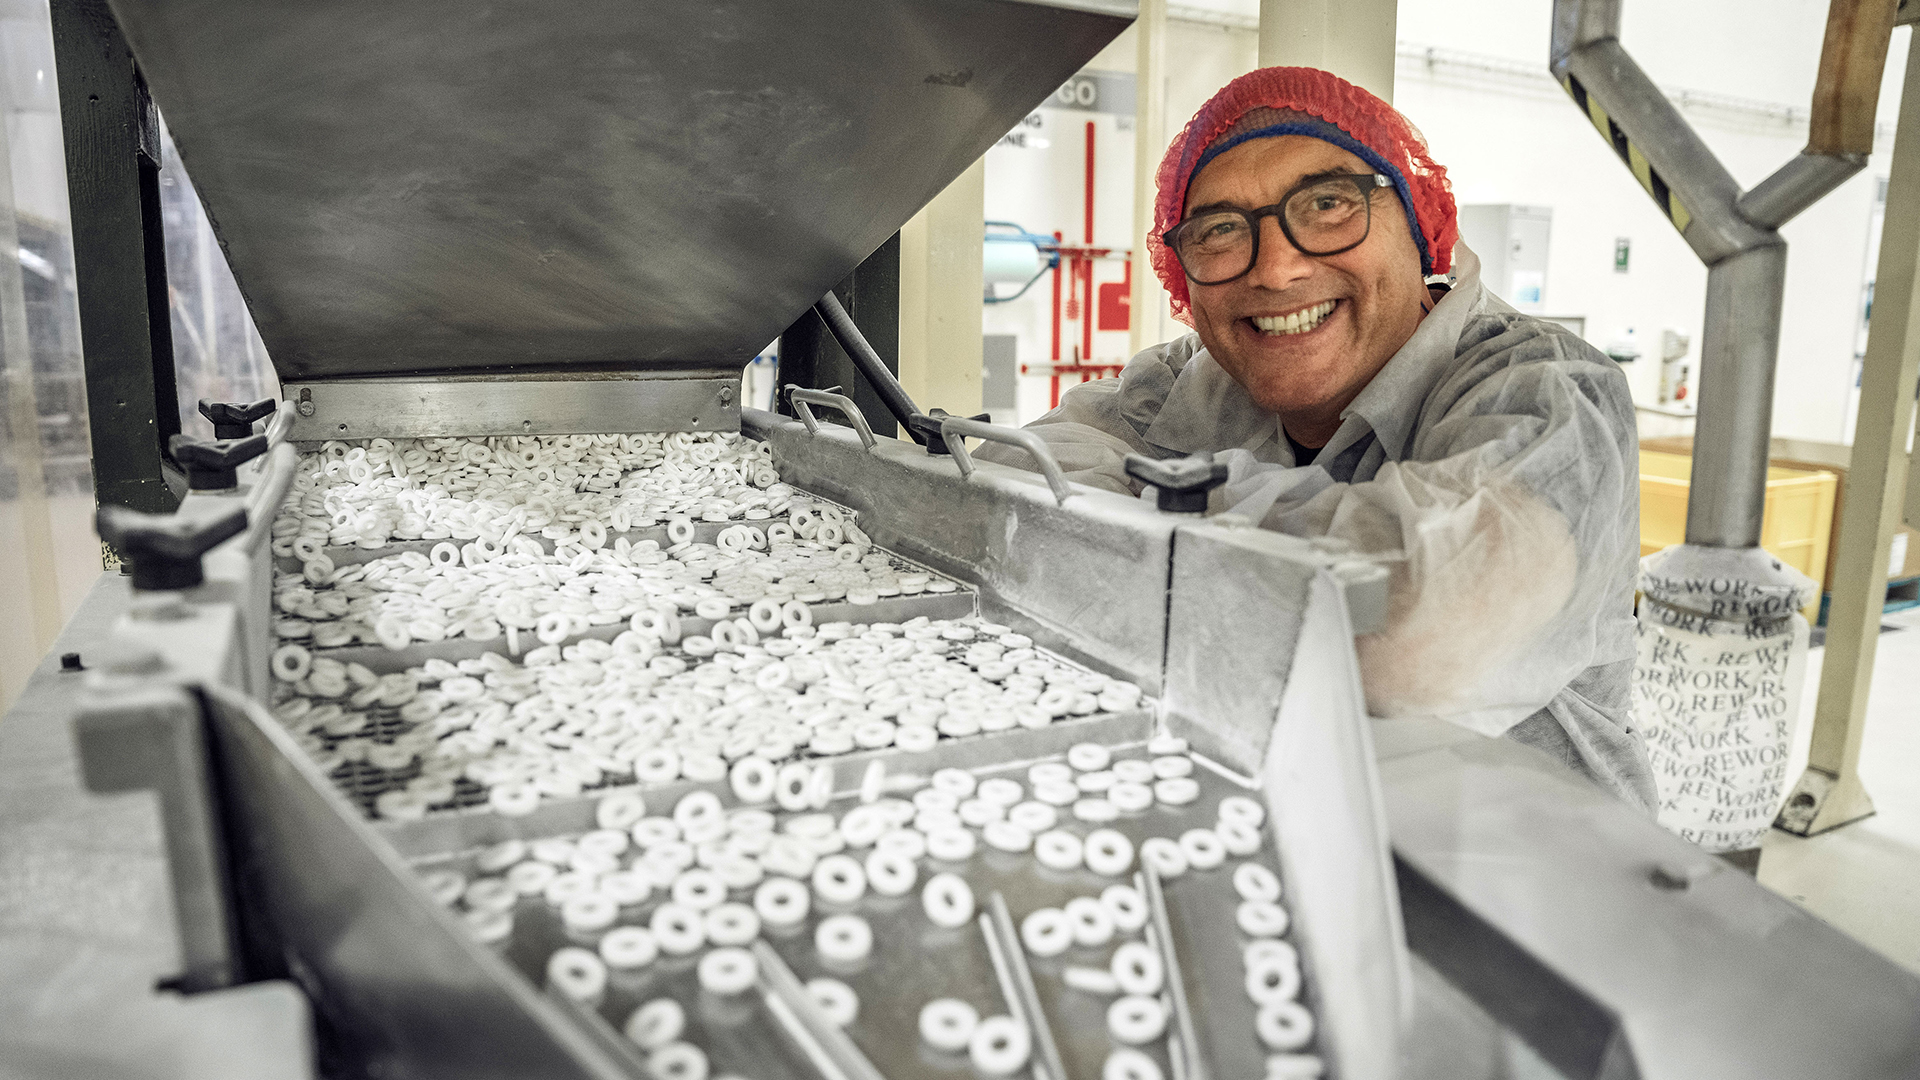 Inside the Factory host Gregg Wallace grinning next to a conveyor belt